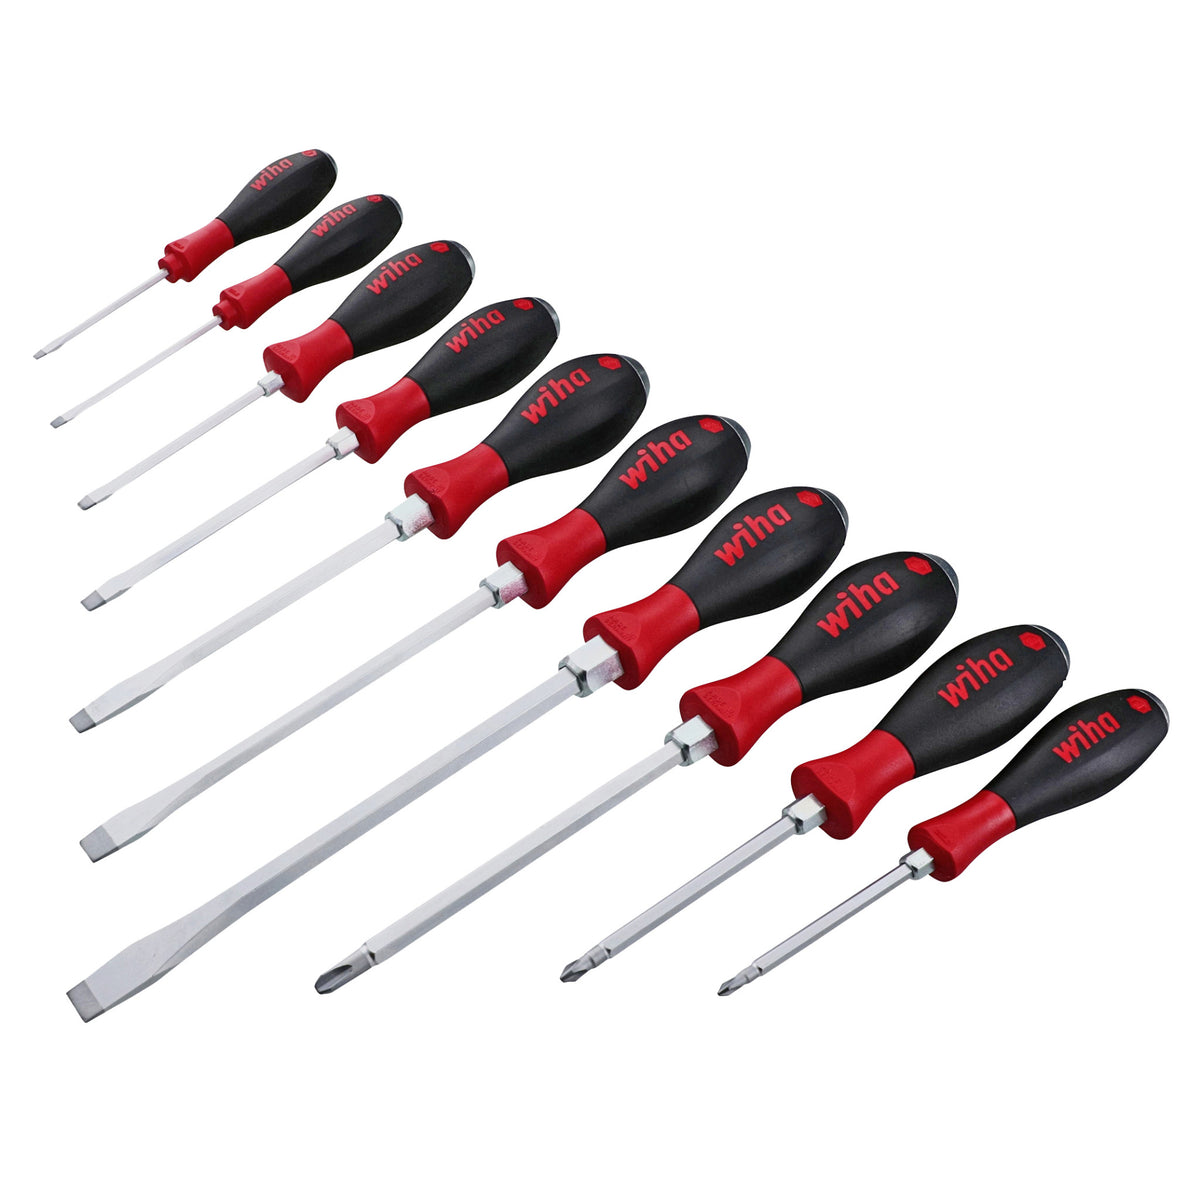 Wiha 53099 10 Piece SoftFinish X Heavy Duty Slotted and Phillips Screwdriver Set